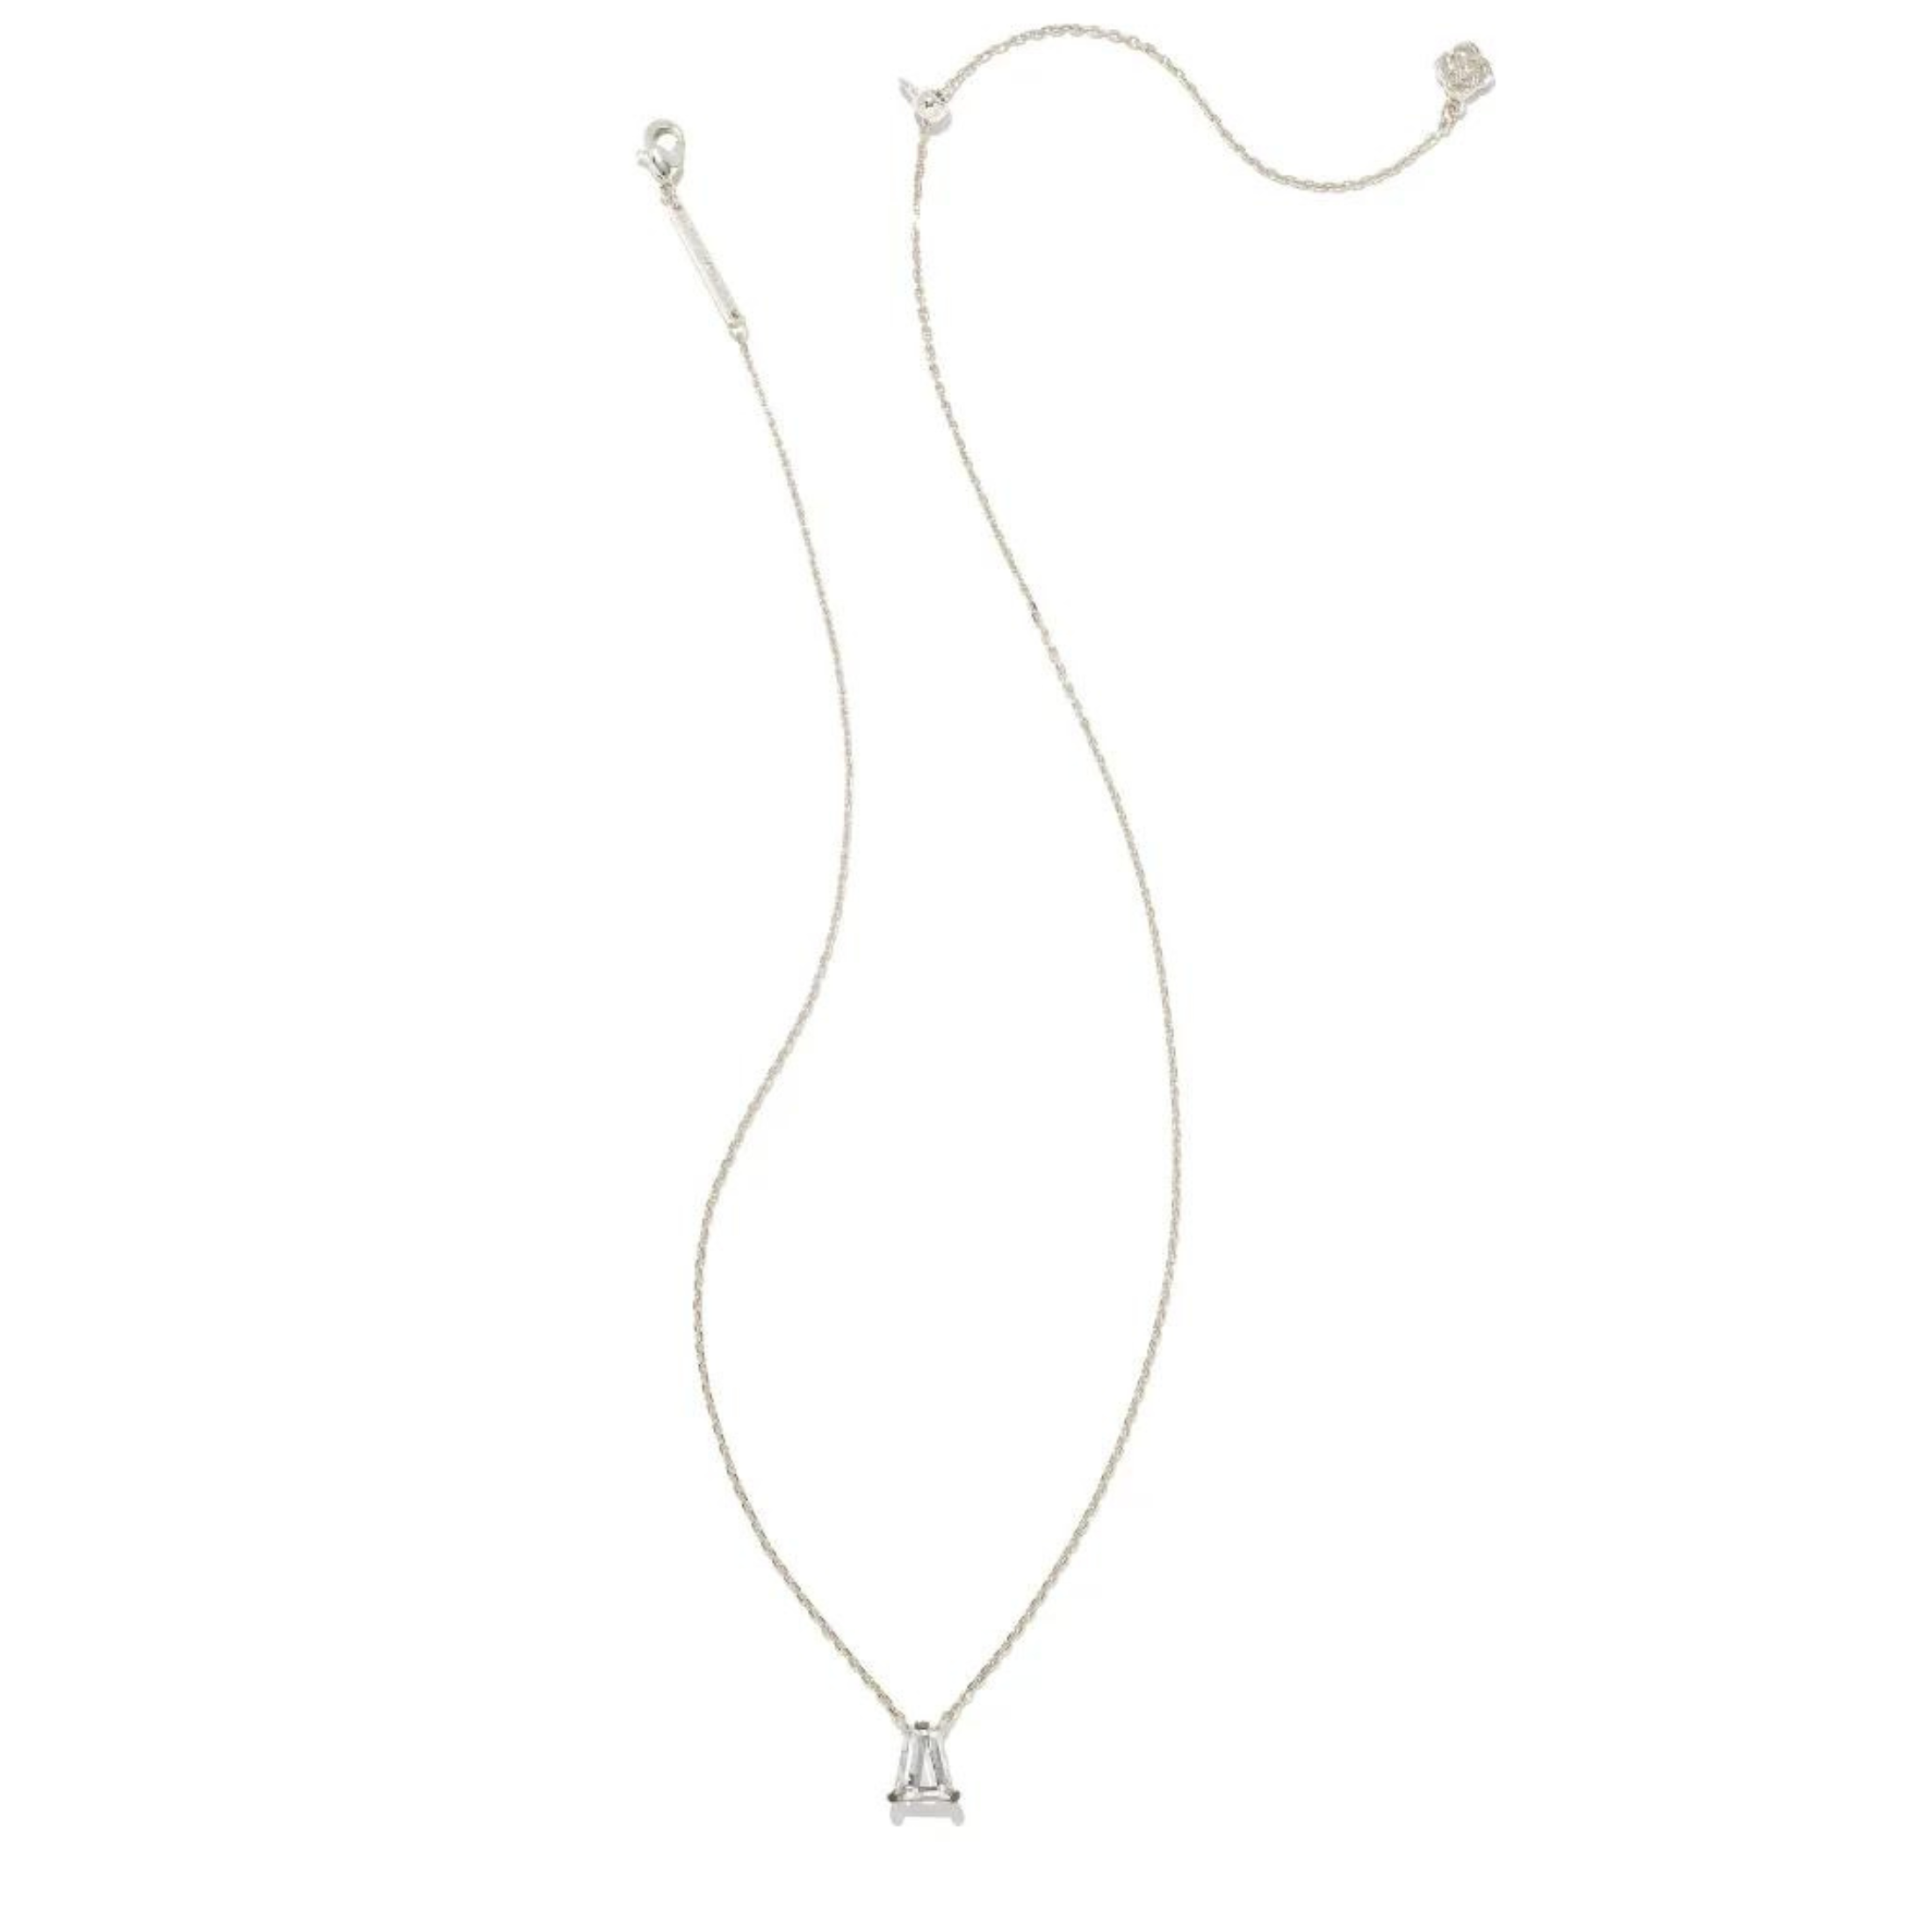 Kendra Scott | Blair Silver Pendant Necklace in White Crystal - Giddy Up Glamour Boutique